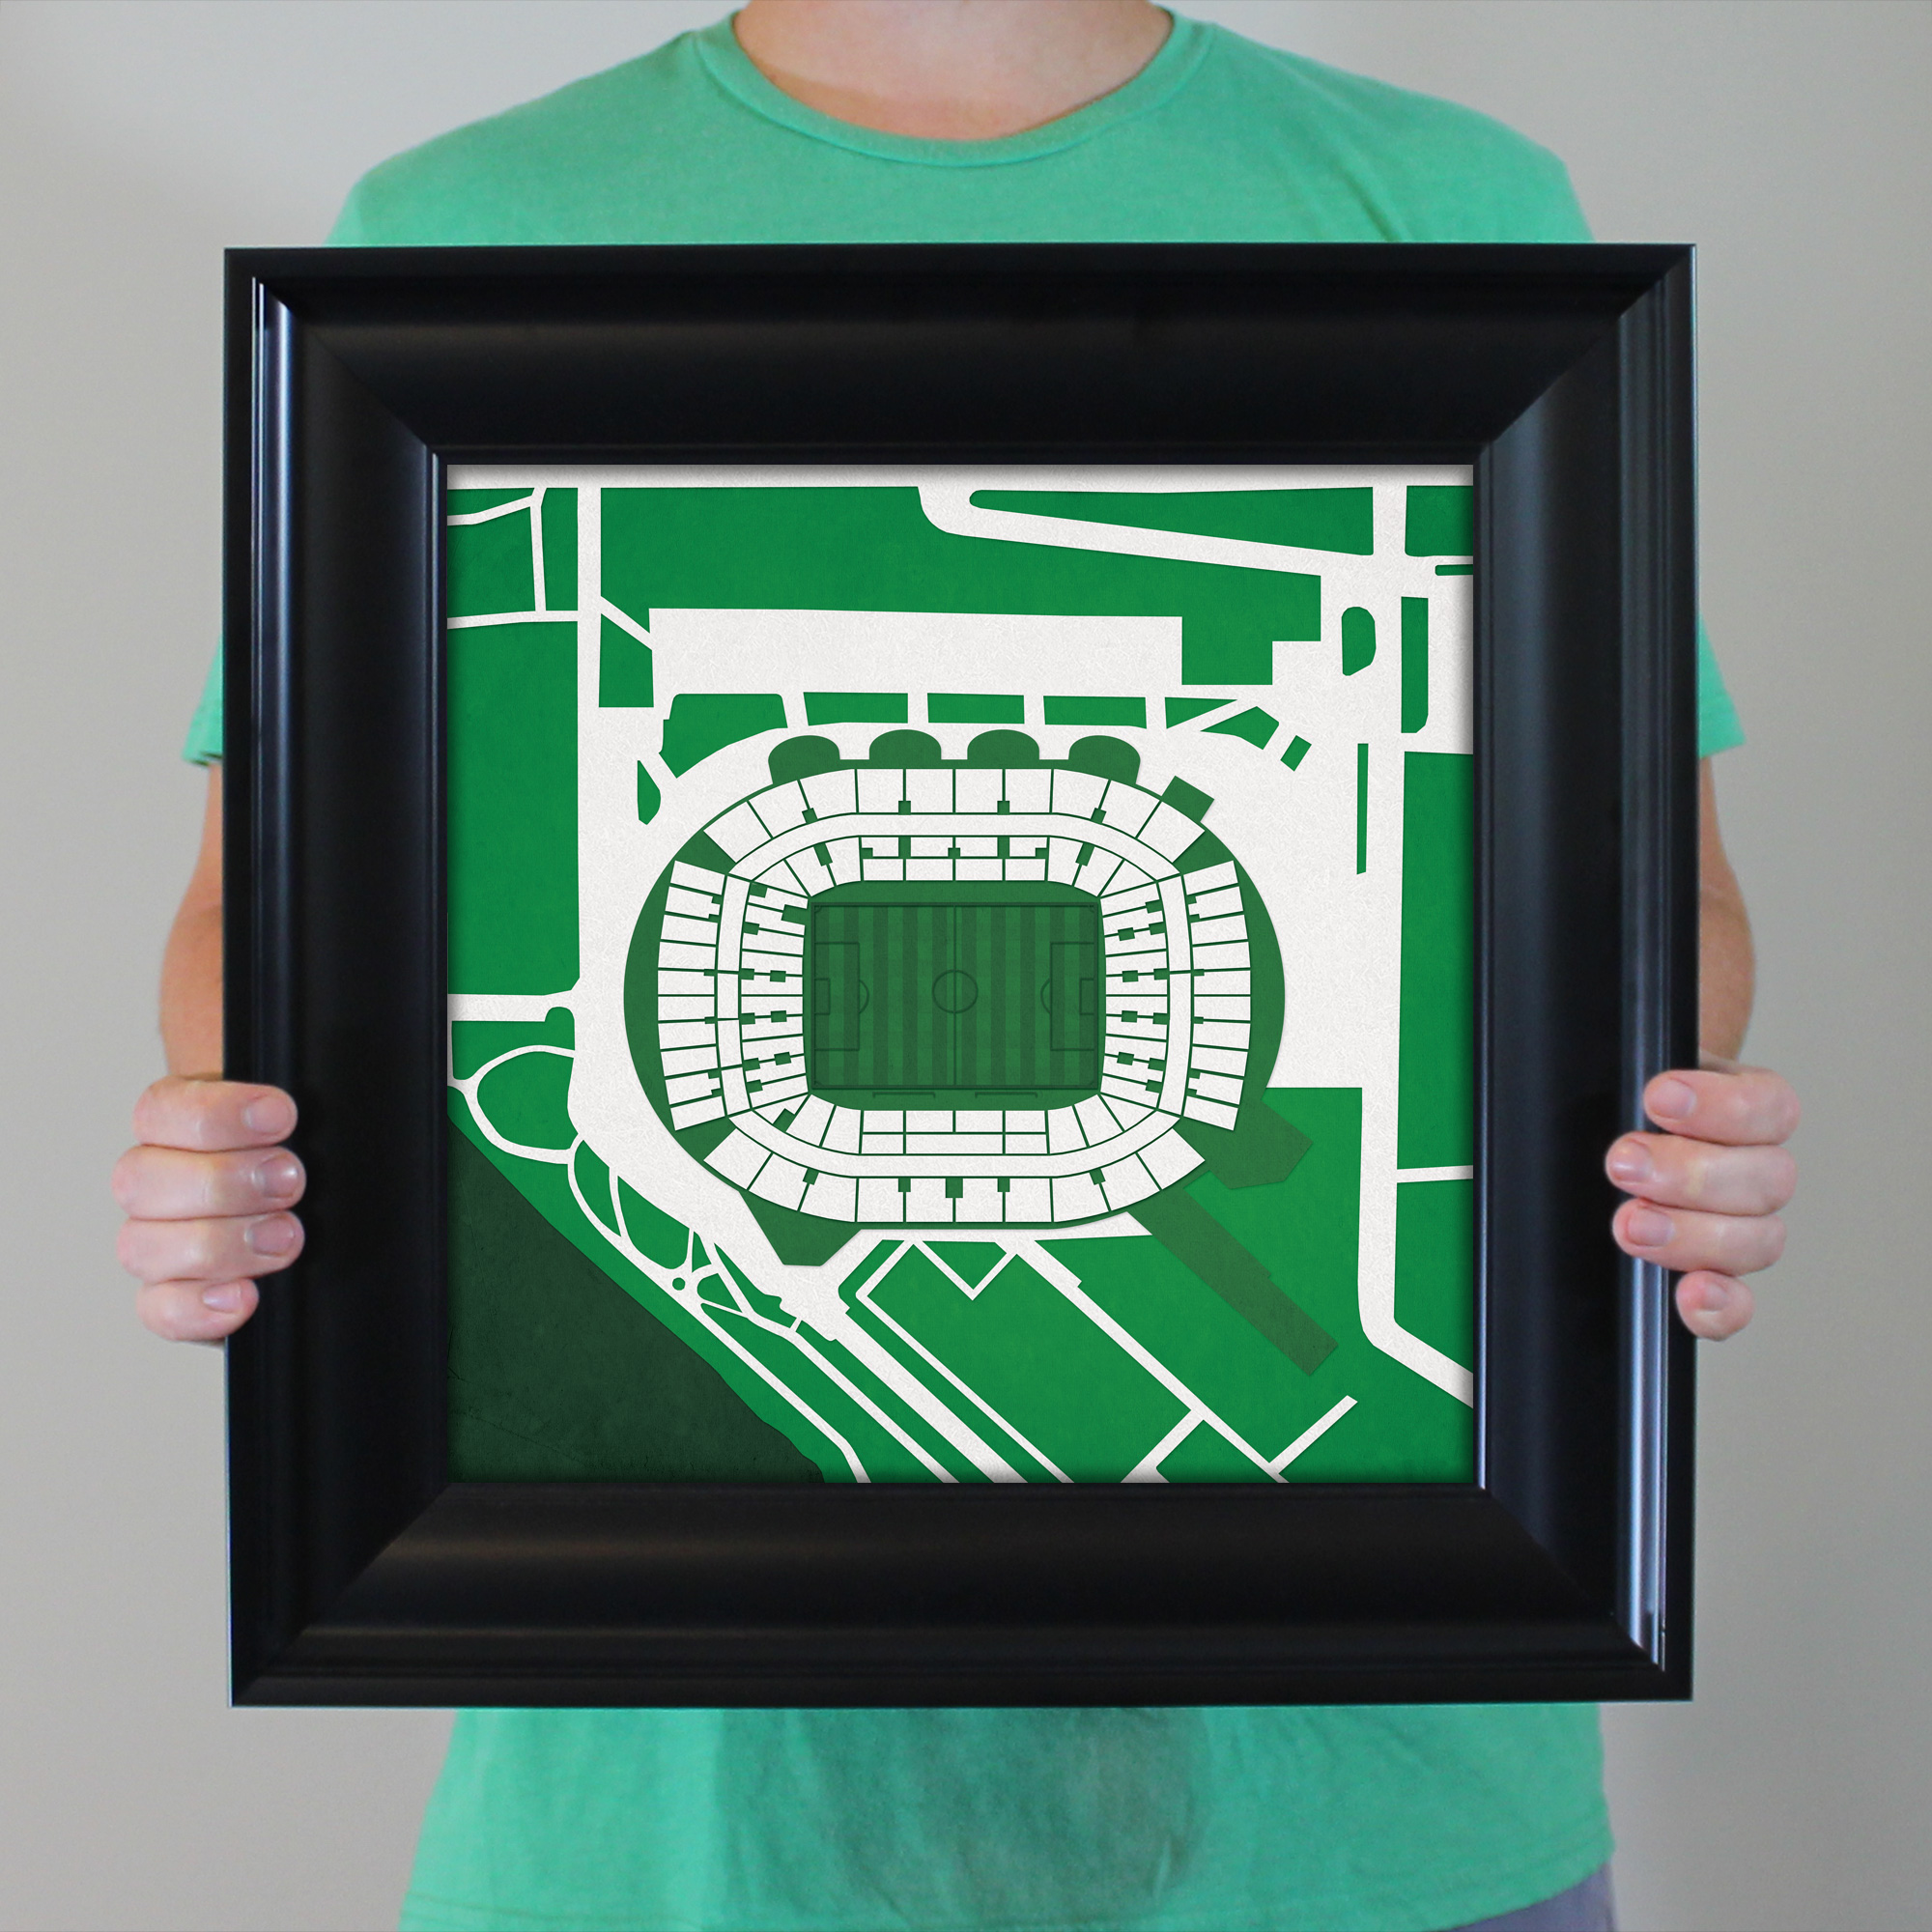 Weserstadion Map City by Shop Prints - Art Map The